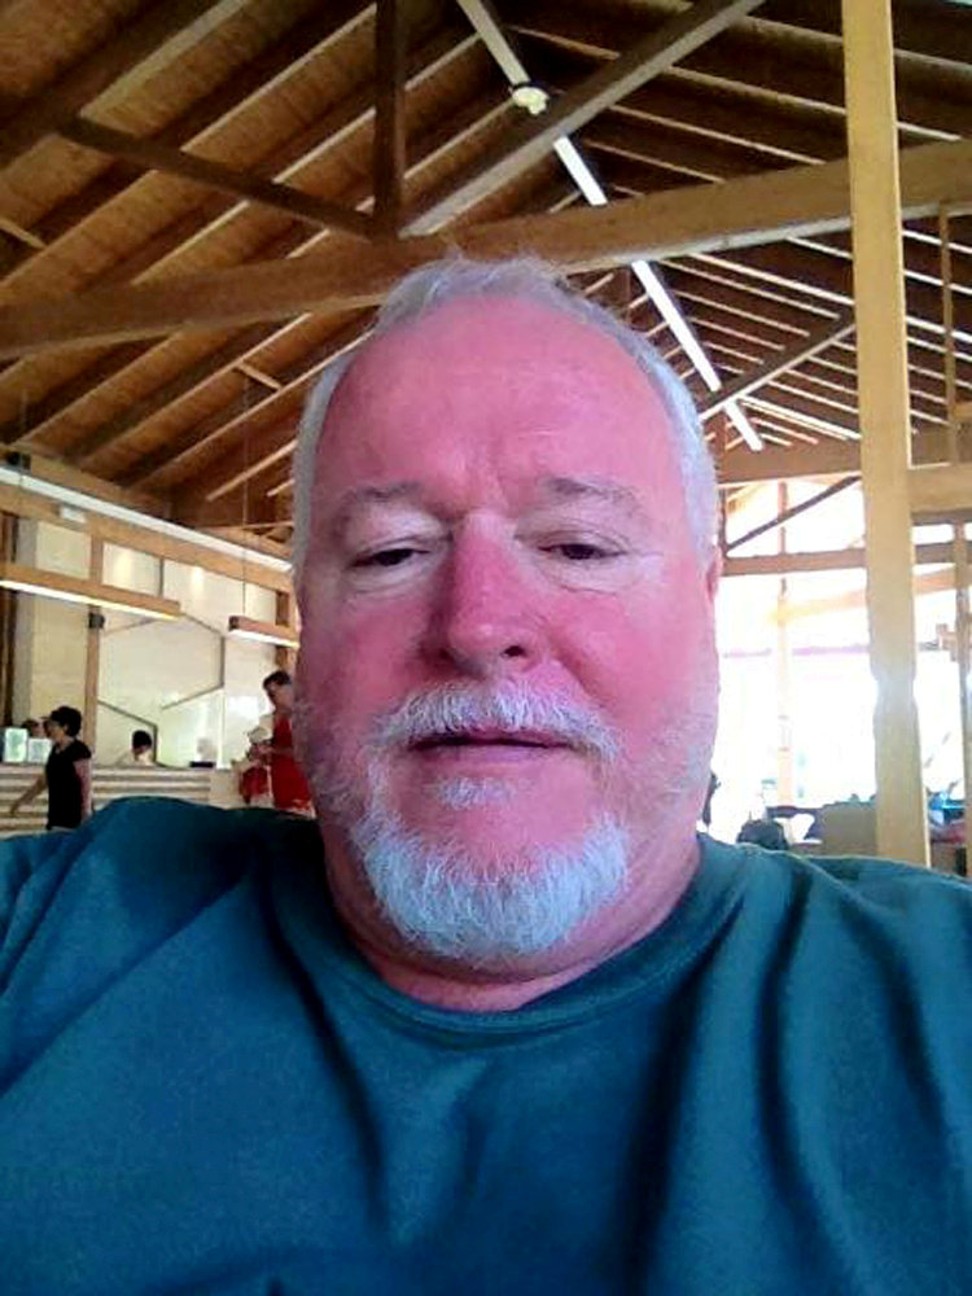 Bruce McArthur, a 67-year-old Toronto freelance landscaper who has admitted murdering eight people, some of whose dead bodies were found in large planters on his clients' properties. Photo: Facebook via Reuters